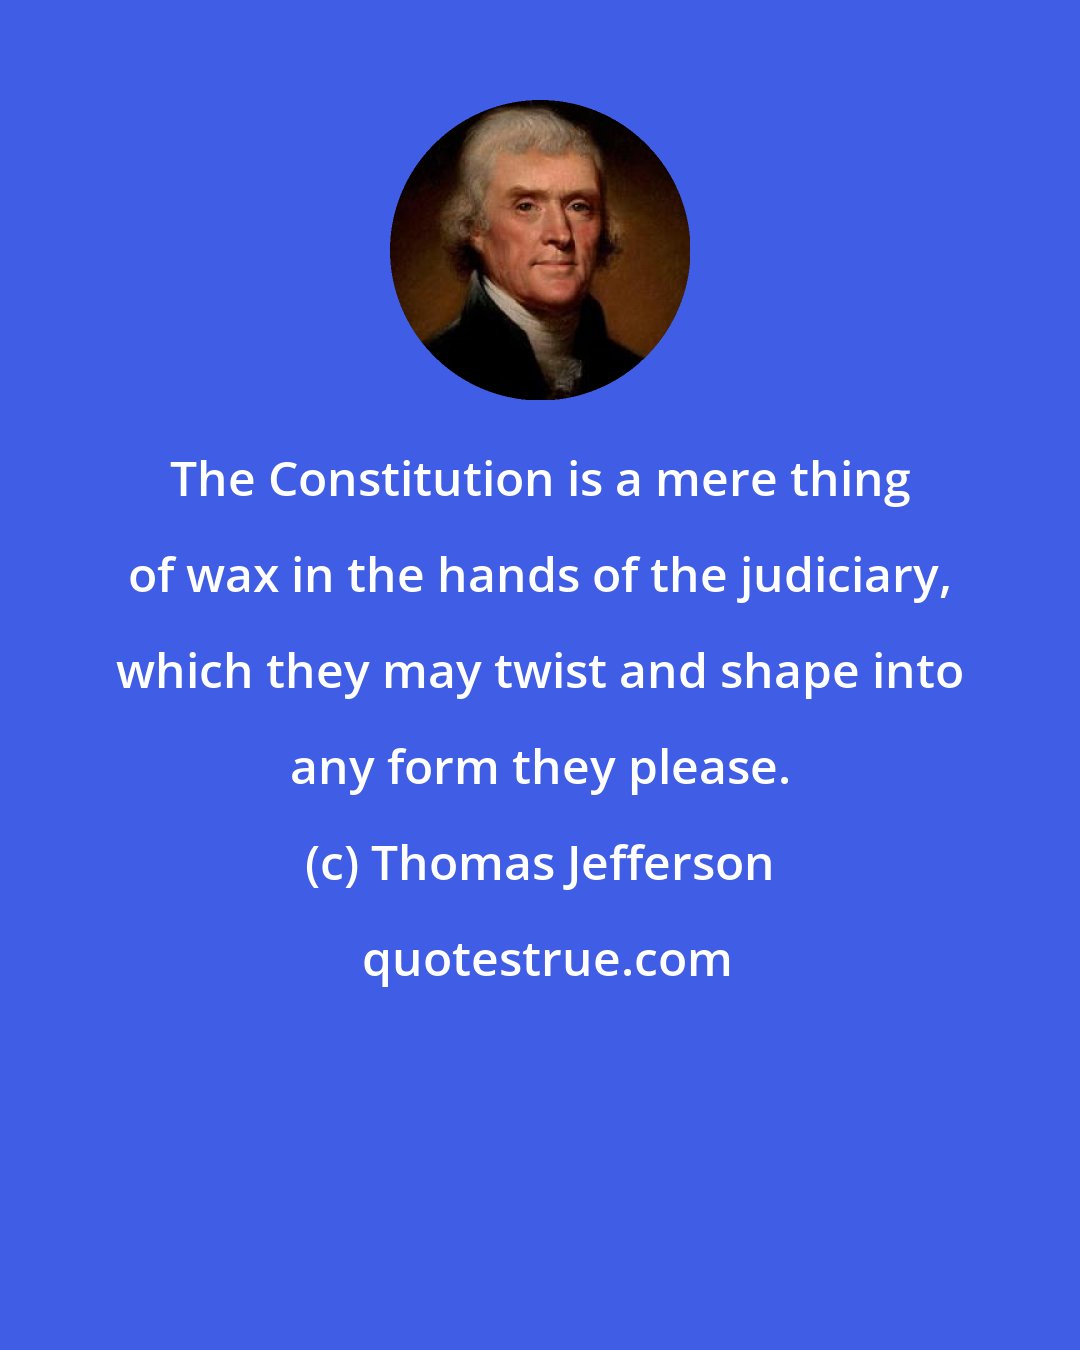 Thomas Jefferson: The Constitution is a mere thing of wax in the hands of the judiciary, which they may twist and shape into any form they please.